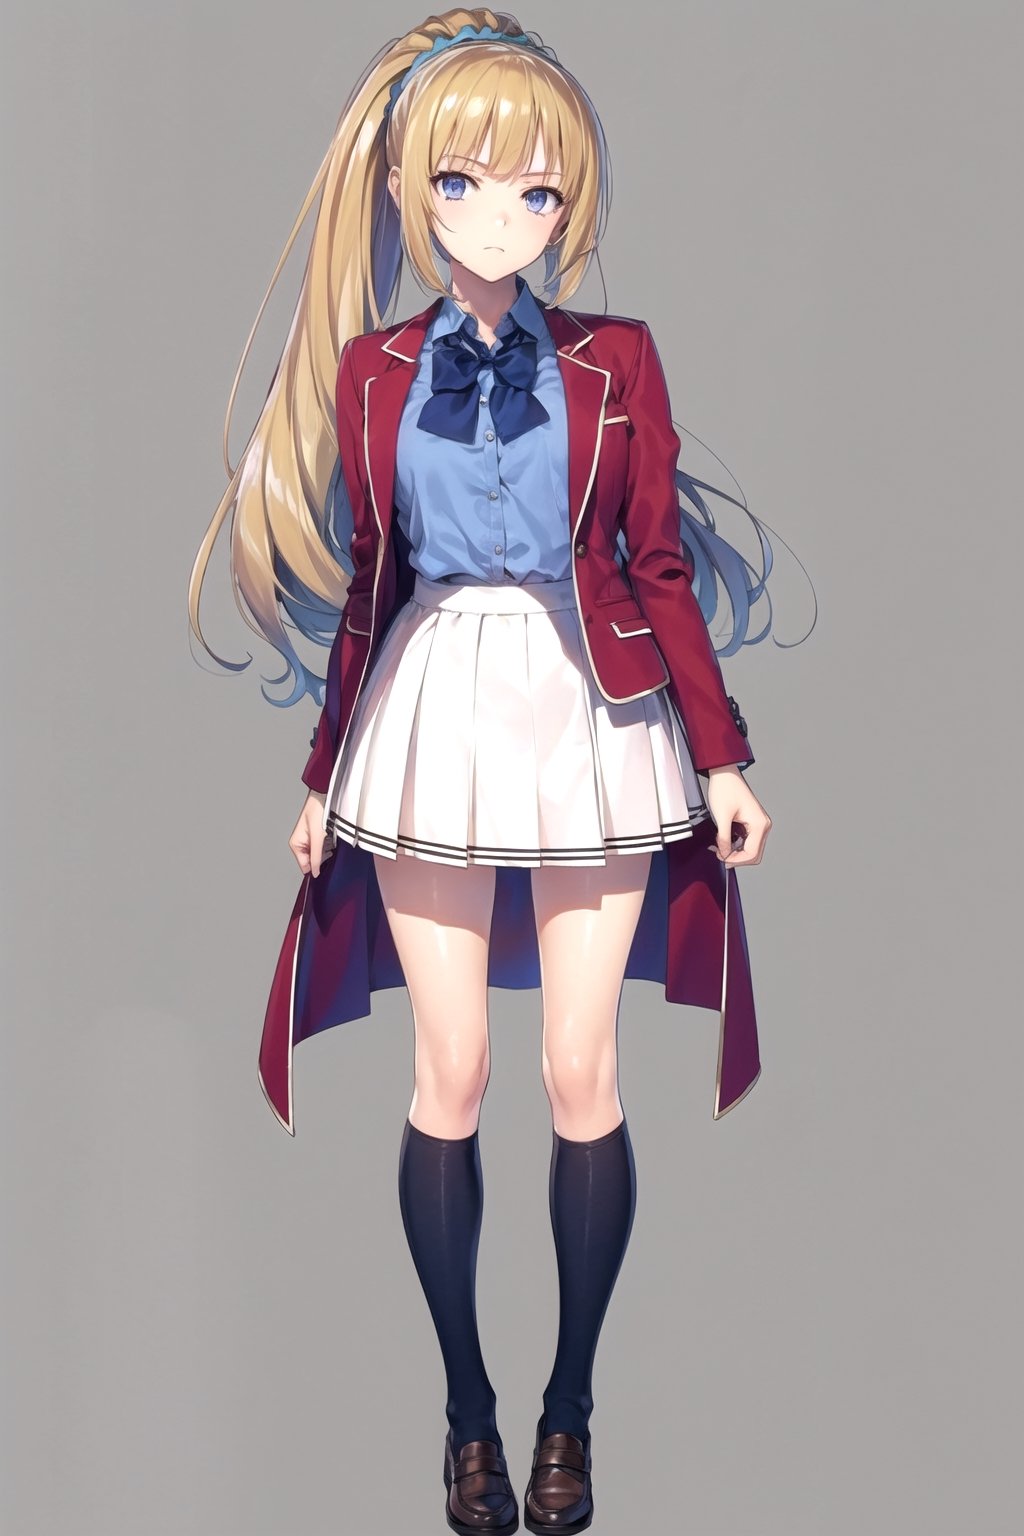 //Quality,
masterpiece, best quality
,//Character,
1girl, solo
,//Fashion,
,//Background,
white_background, simple_background
,//Others,
,KeiKaruizawa, hair scrunchie, school uniform, blue shirt, bowtie, white skirt, red jacket, open jacket, full_body